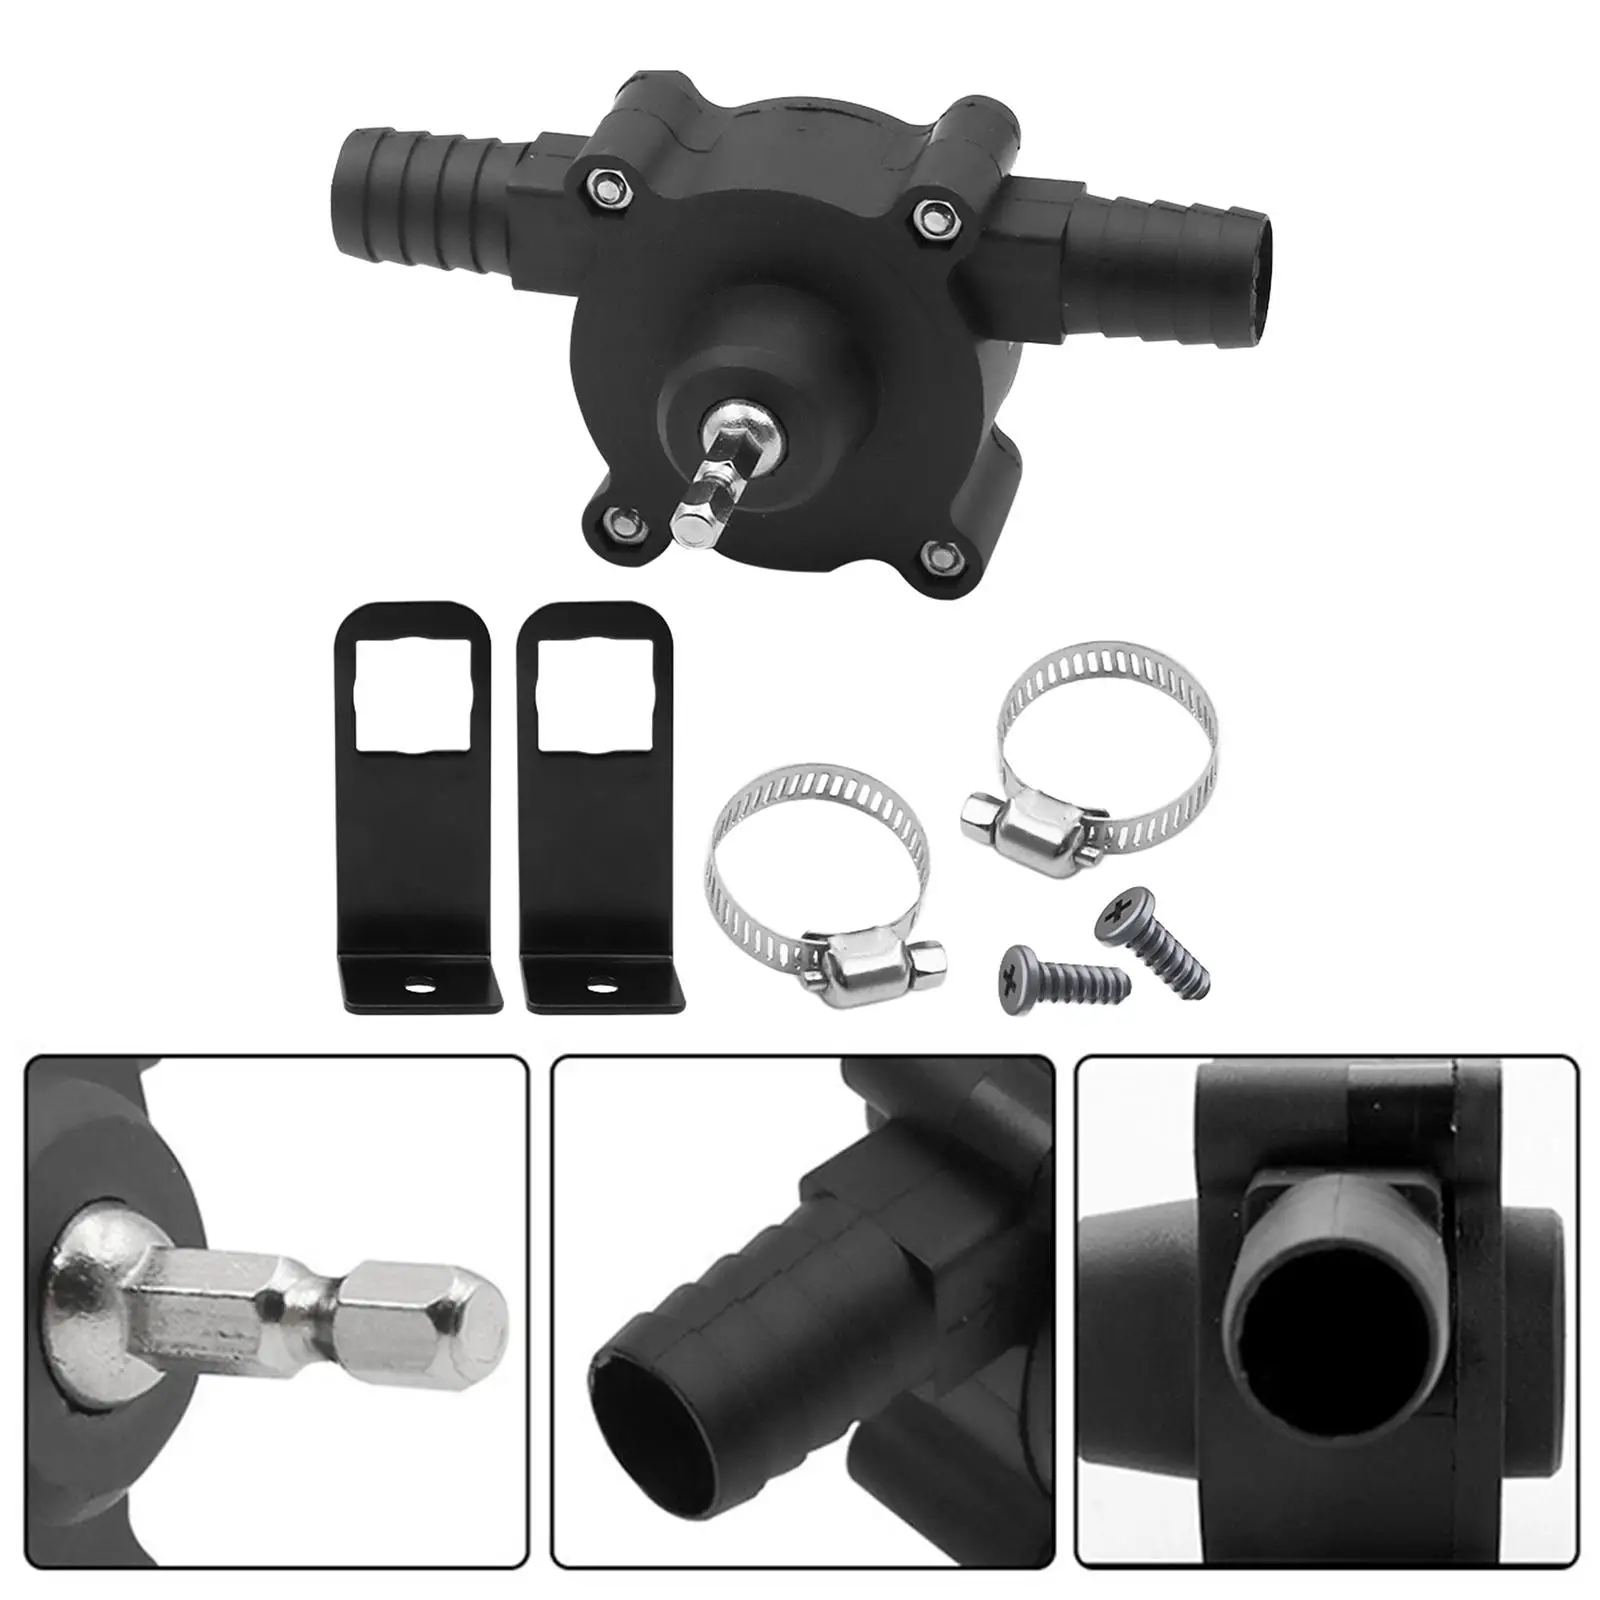 Hand Drill Drive Pump Pump Attachment Water Transfer Pump Household Small Water Pump for Liquids Outdoor Diesels Oil Home